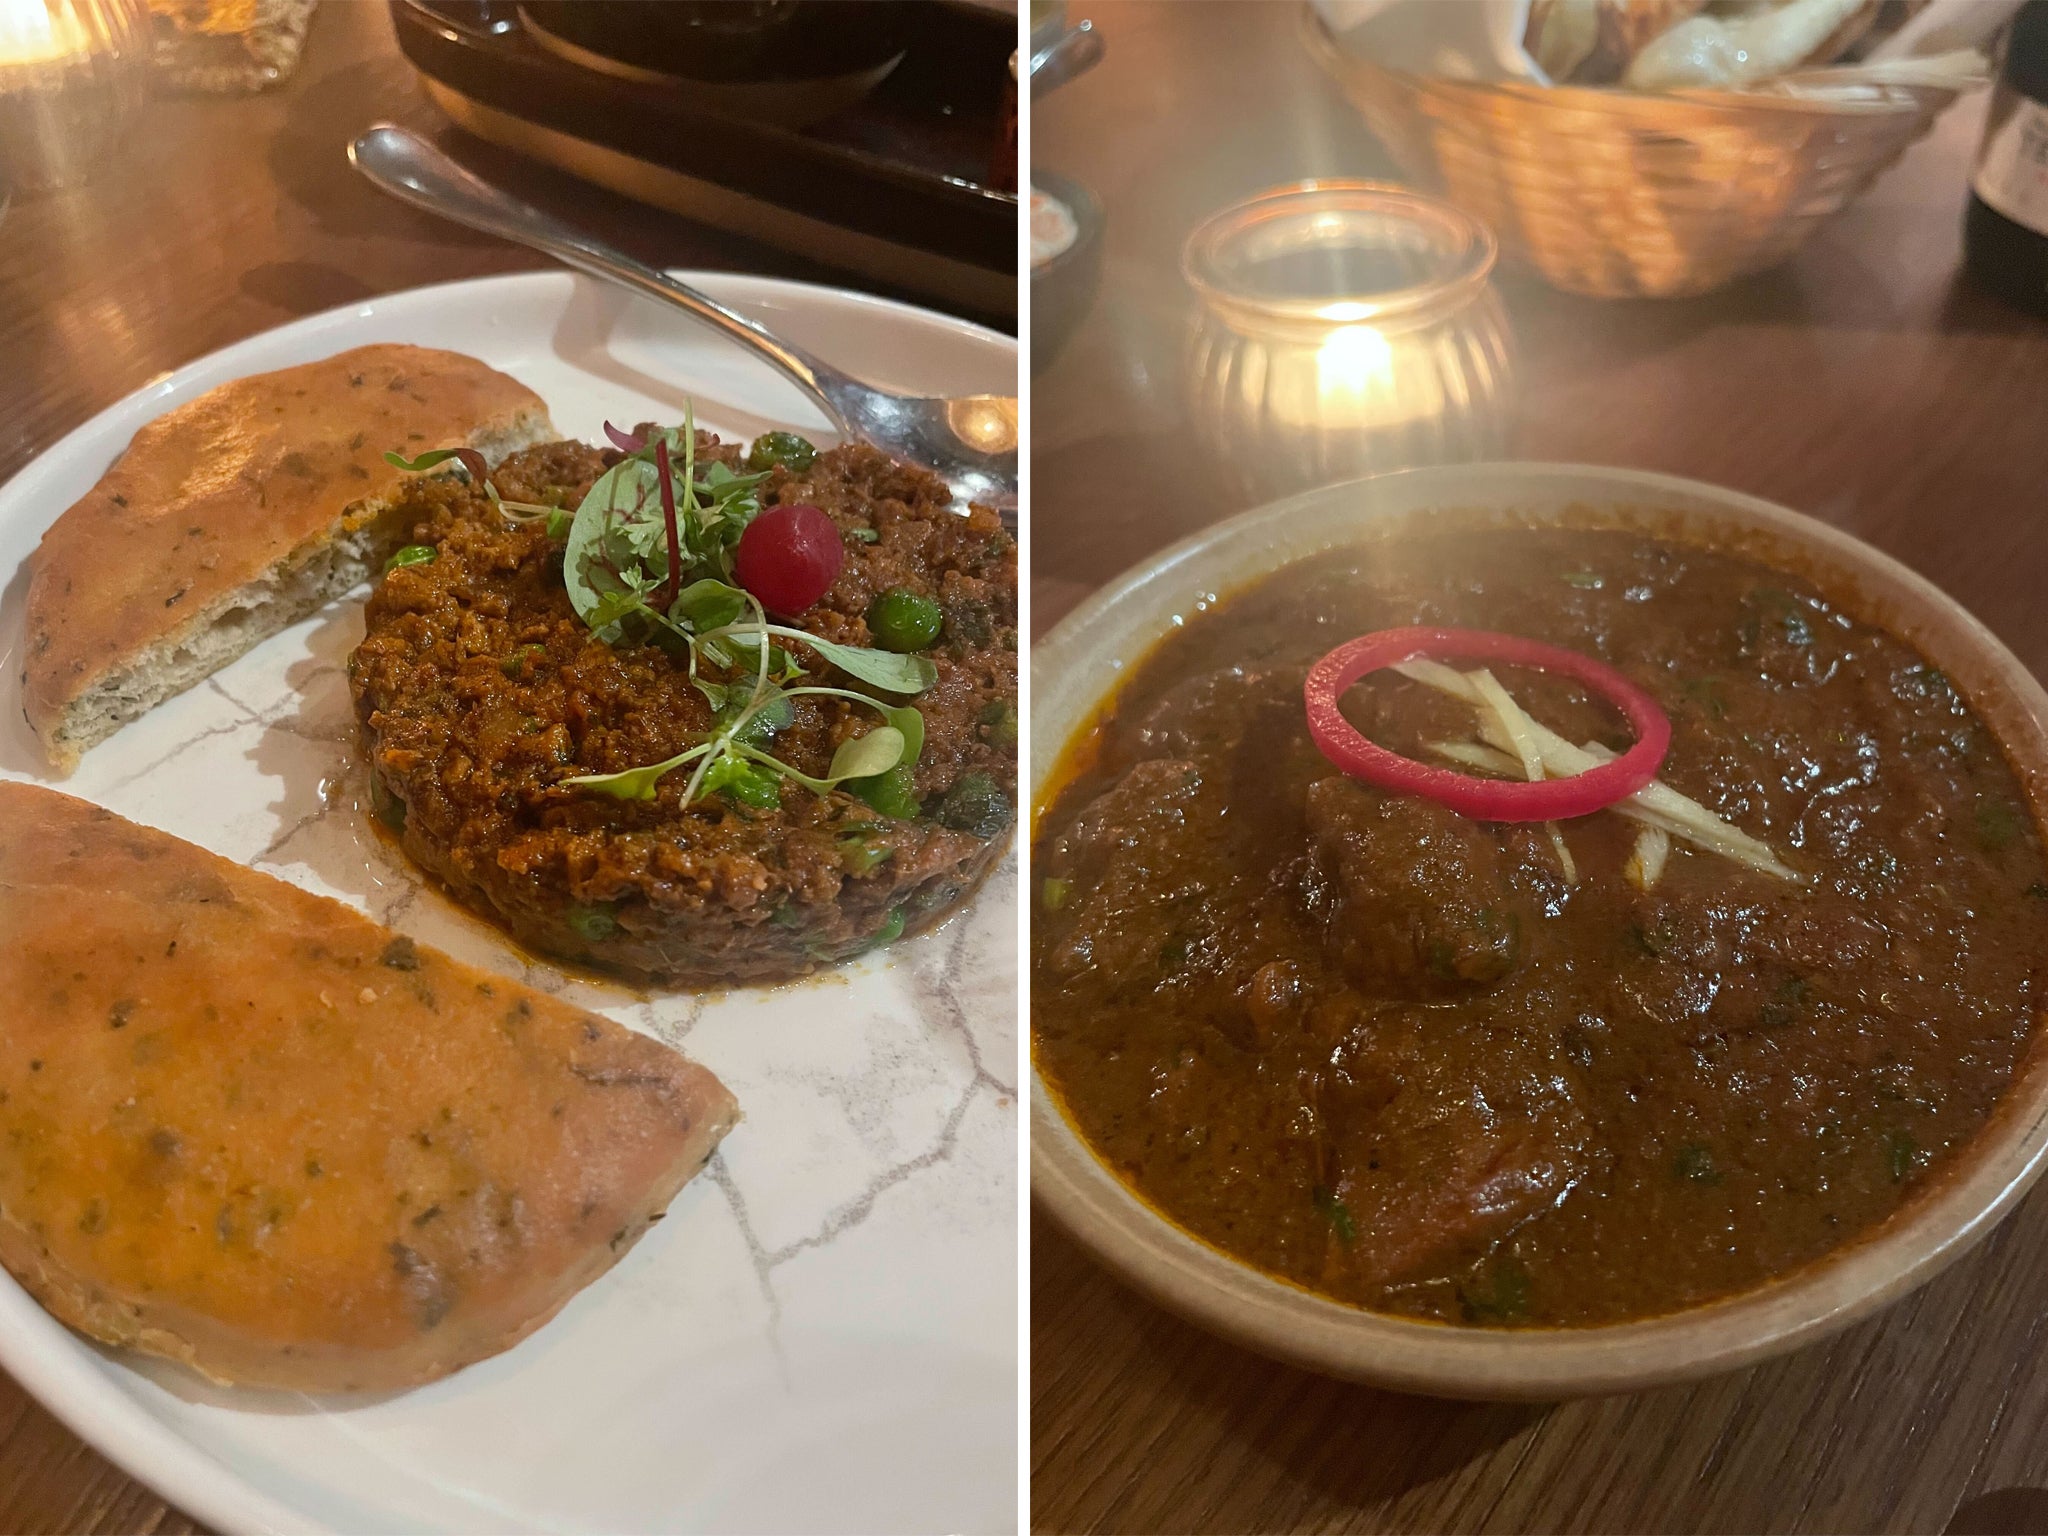 The main dishes range from kheema to curries